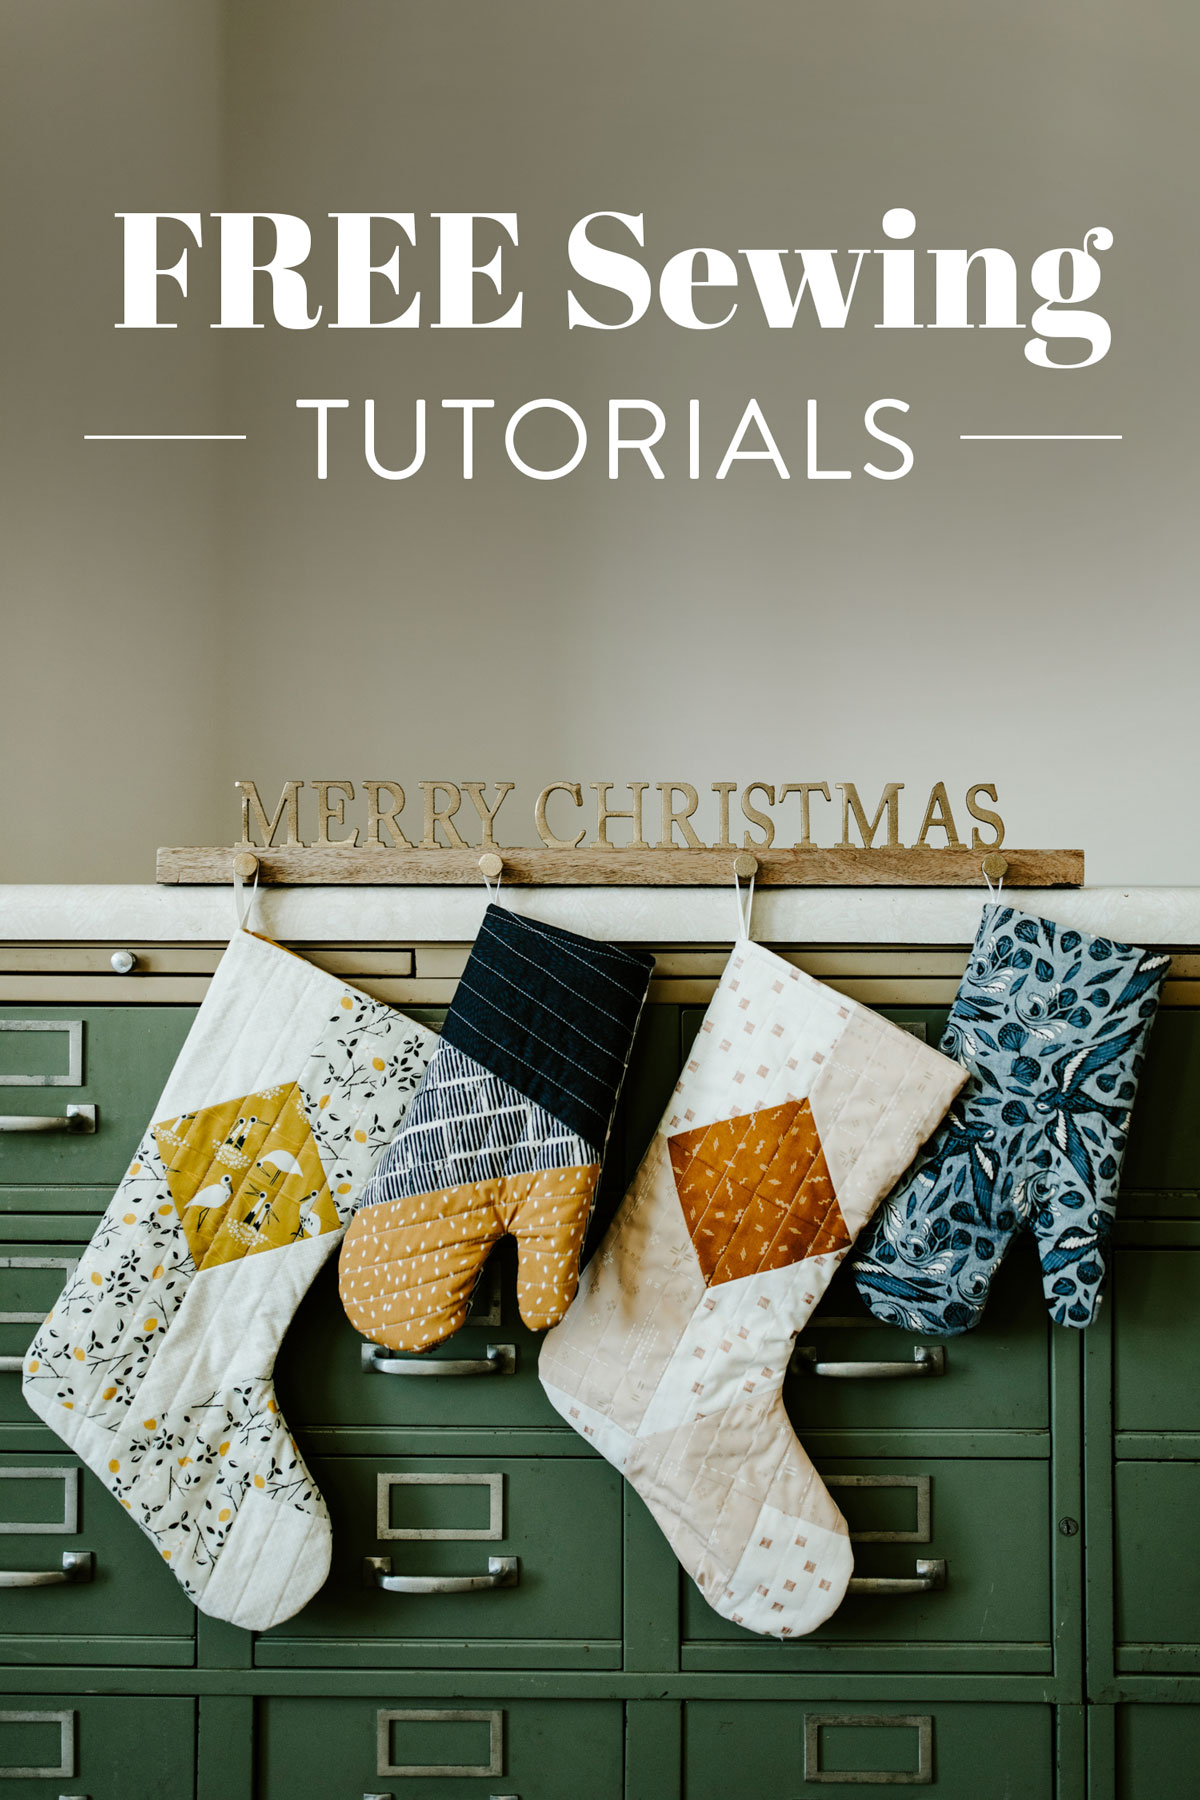 This quilted oven mitt tutorial shows step-by-step instructions to sew a modern patchwork oven mitt – such a beautiful DIY gift! suzyquilts.com #ovenmitt #DIYsewing